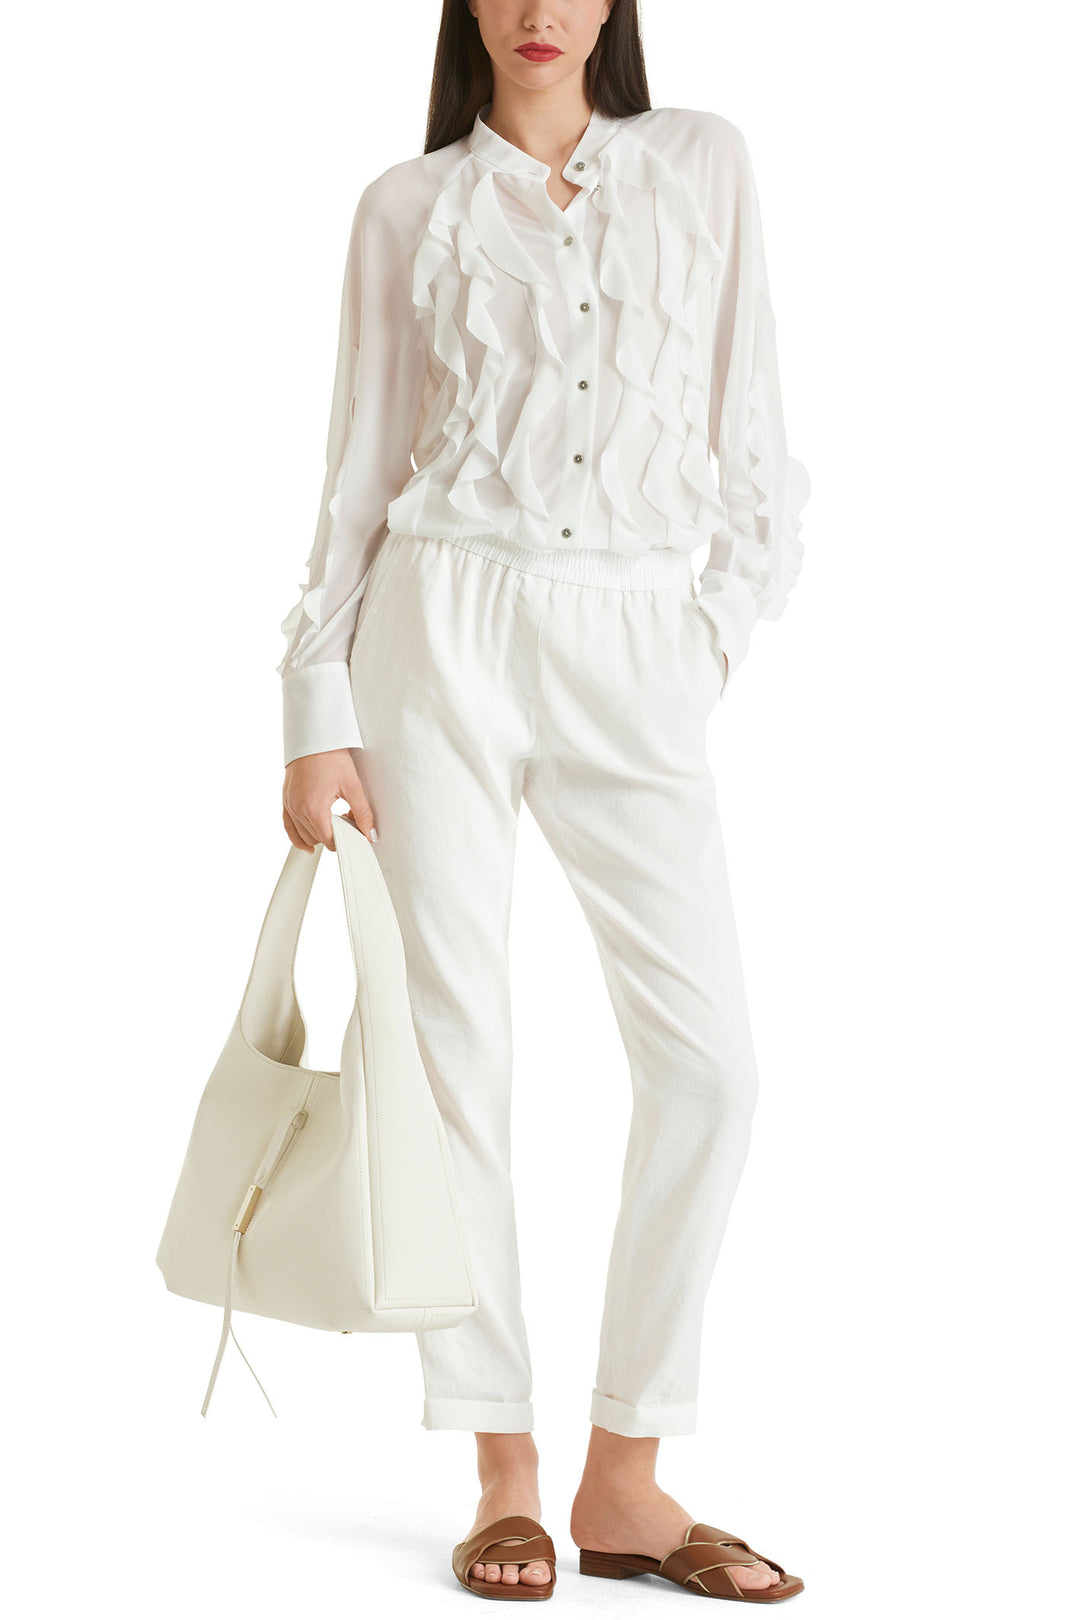 Marc Cain Collections WC 81.59 W47 110 Off White Pull-On Linen Mix Trousers - Olivia Grace Fashion